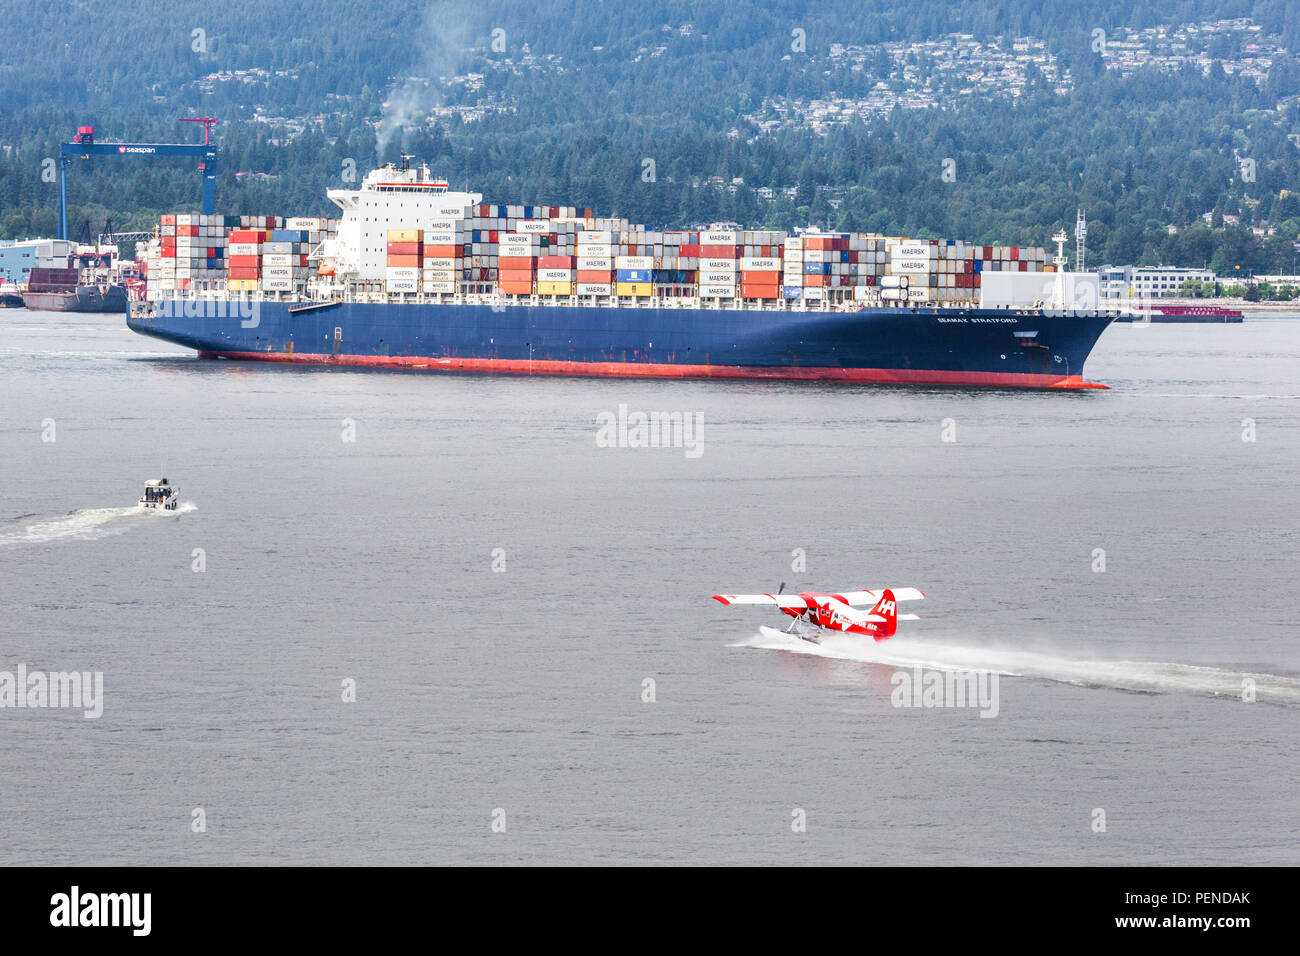 A tourist seaplane taking off in quite close proximity to the container ship Seamax Stratford in the harbour at Vancouver, British Columbia, Canada Stock Photo